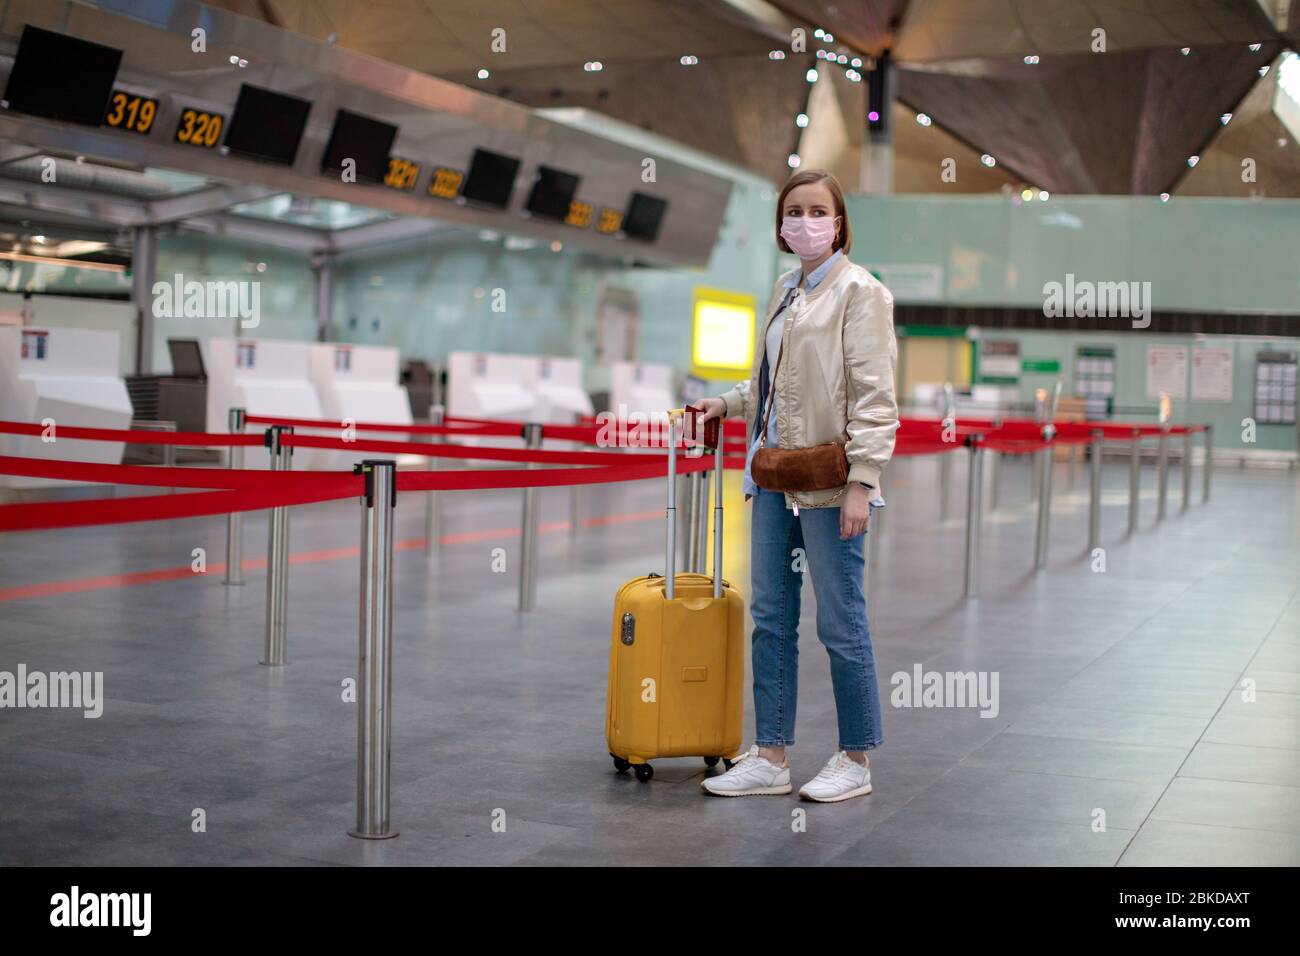 Woman with luggage stands at almost empty check-in counters at the airport terminal due to coronavirus pandemic/Covid-19 outbreak travel restrictions. Stock Photo